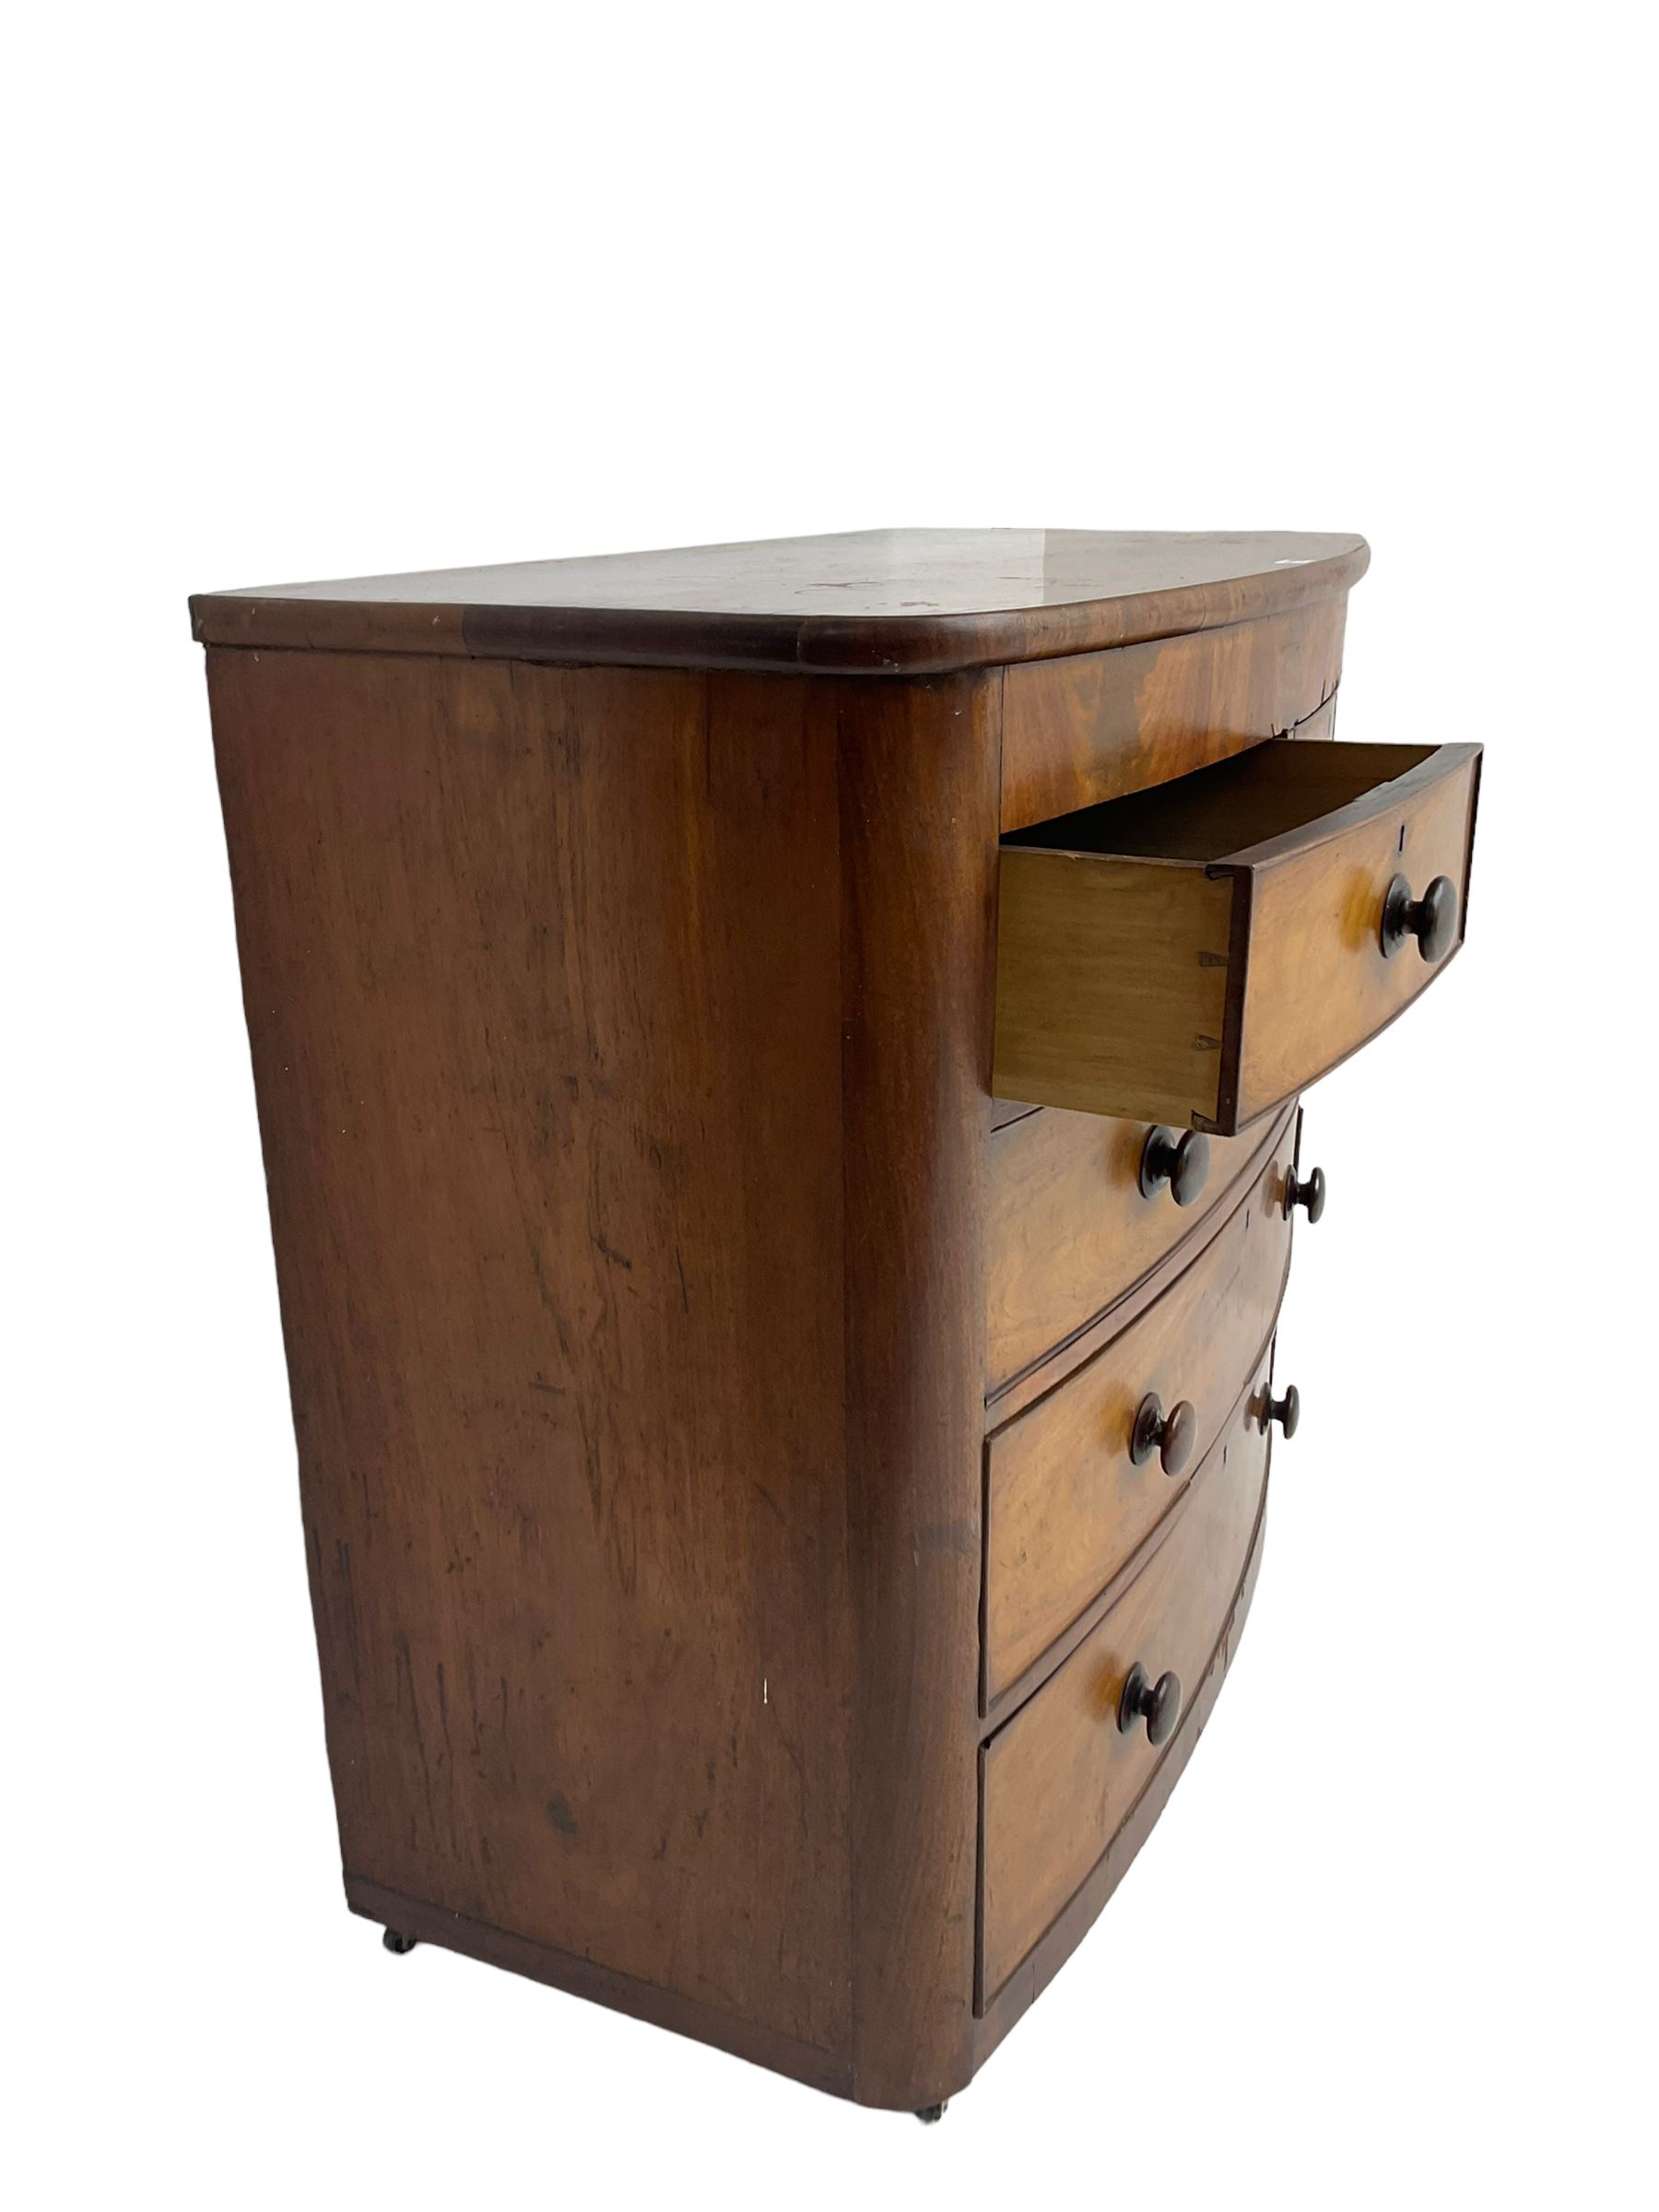 Late 19th century mahogany bow front chest - Image 4 of 7